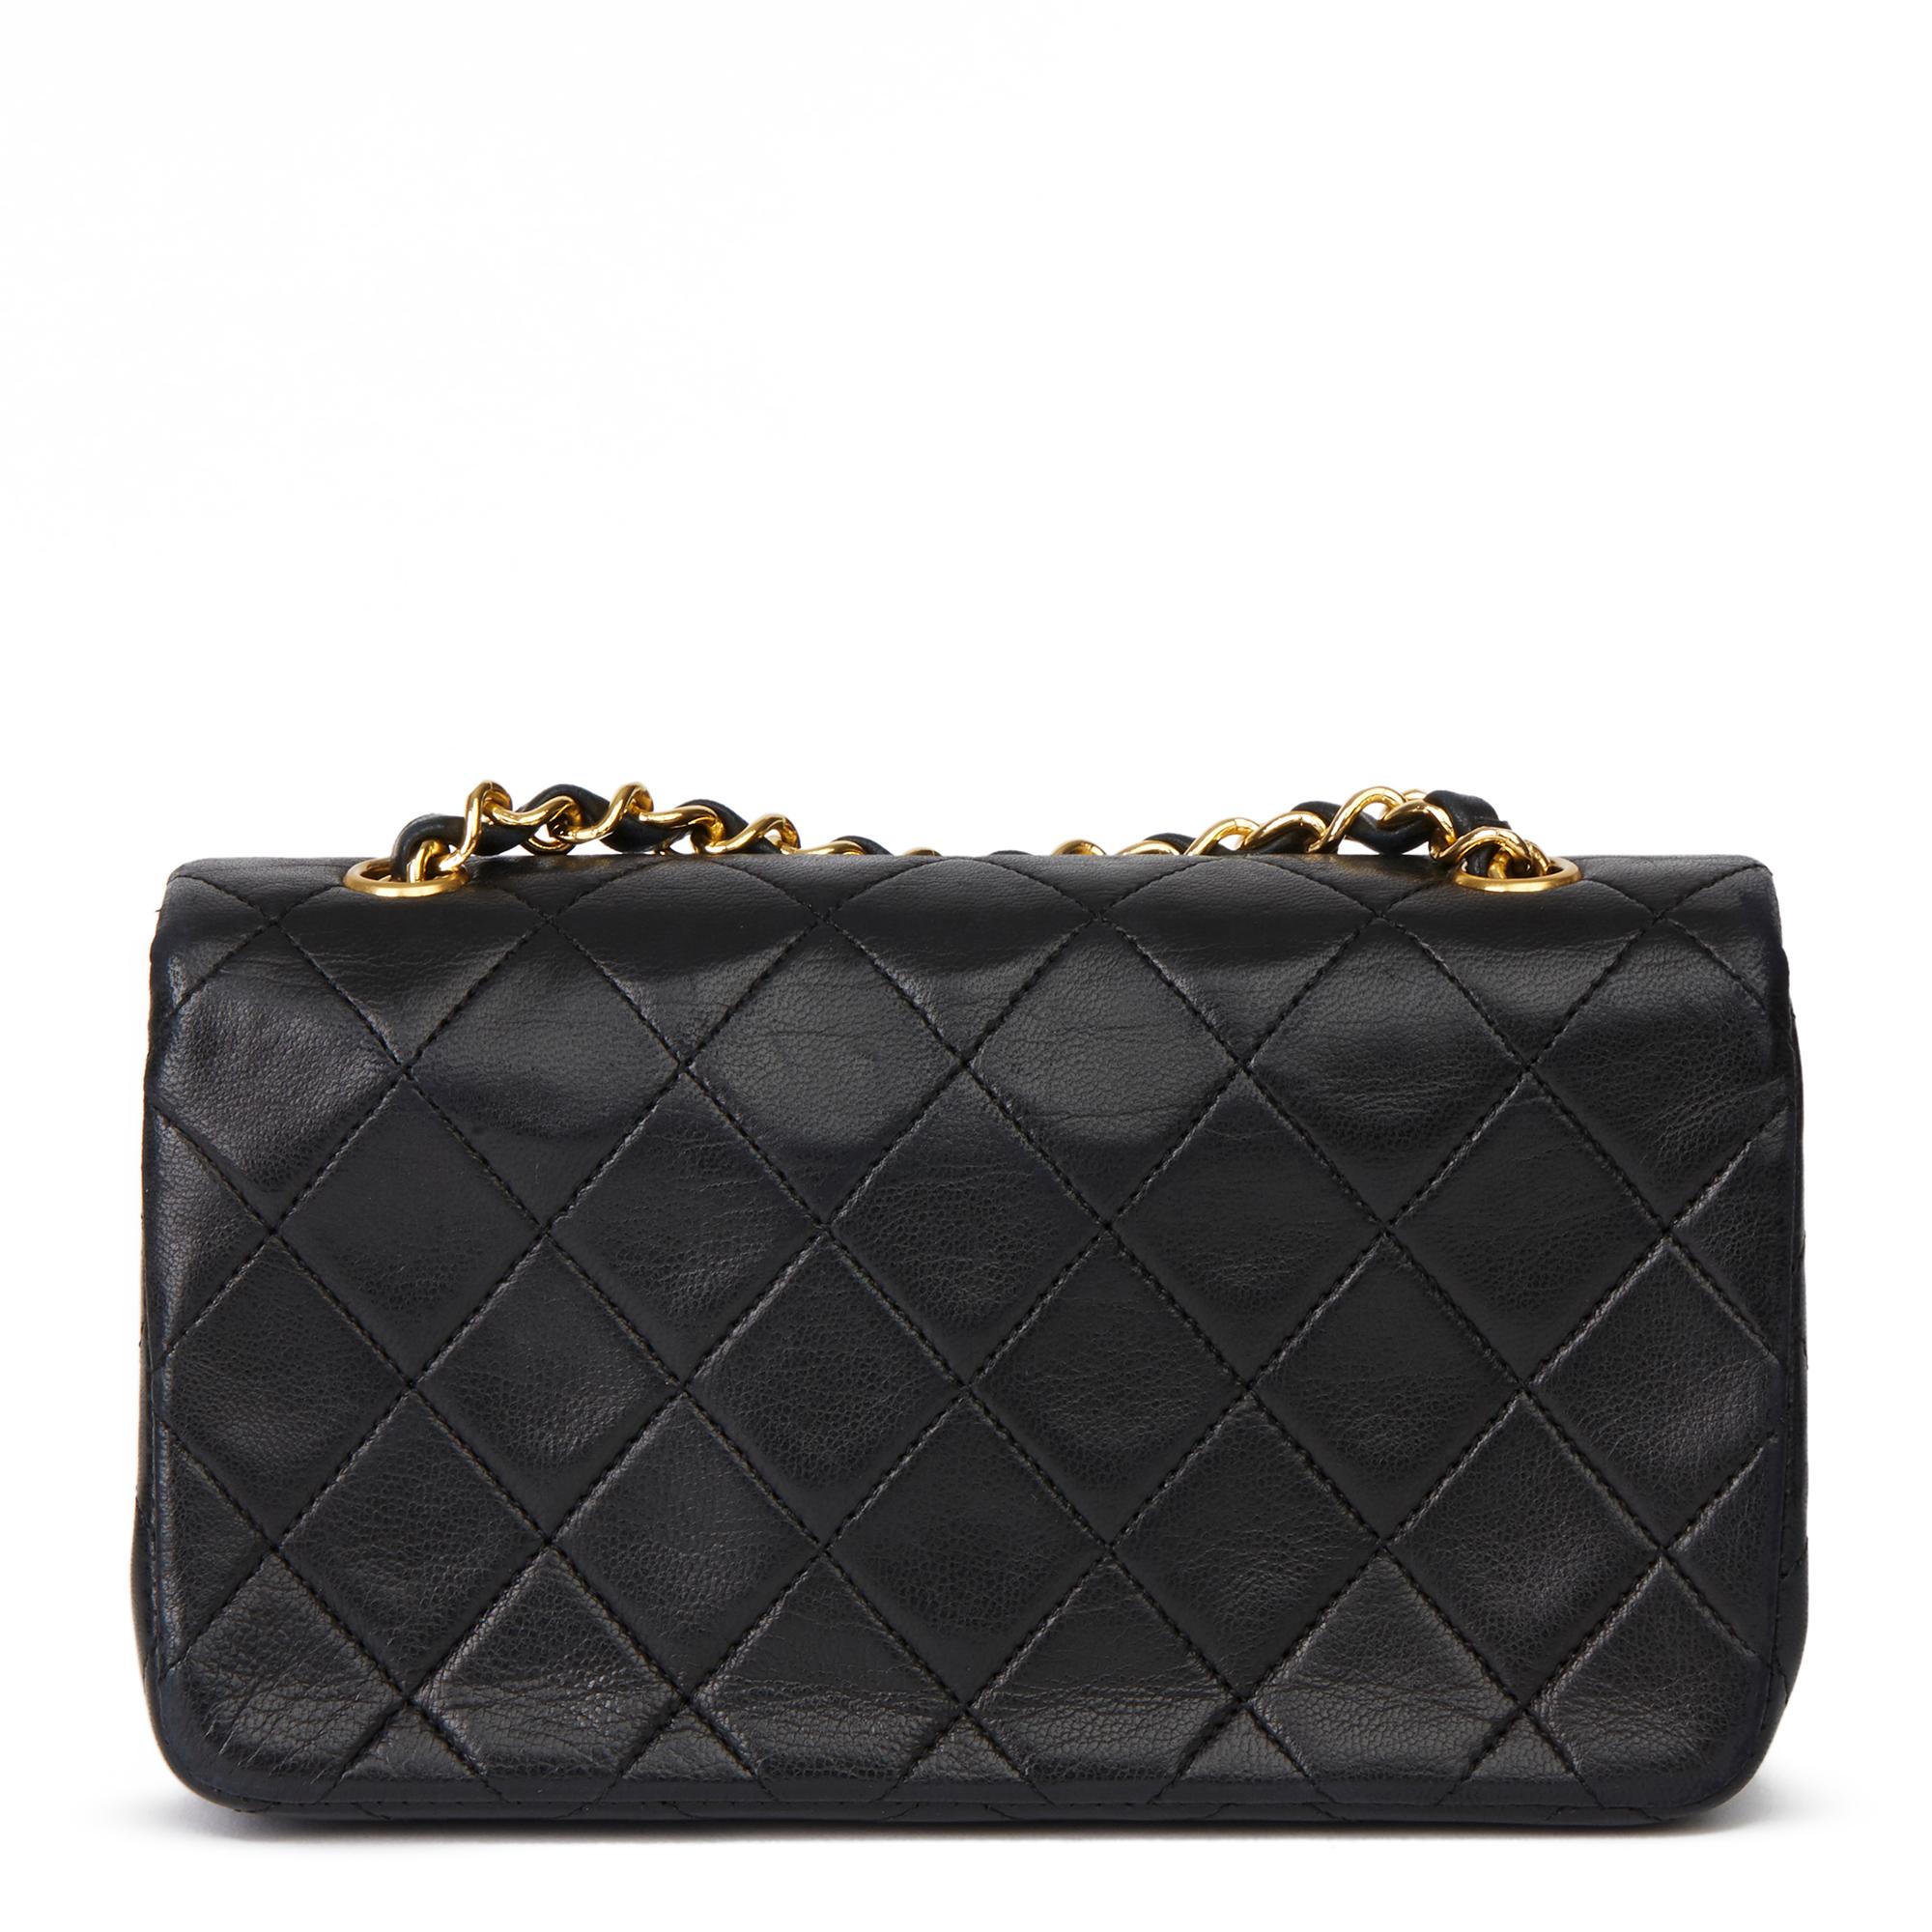 Women's 1991 Chanel Black Quilted Lambskin Vintage Mini Flap Bag 